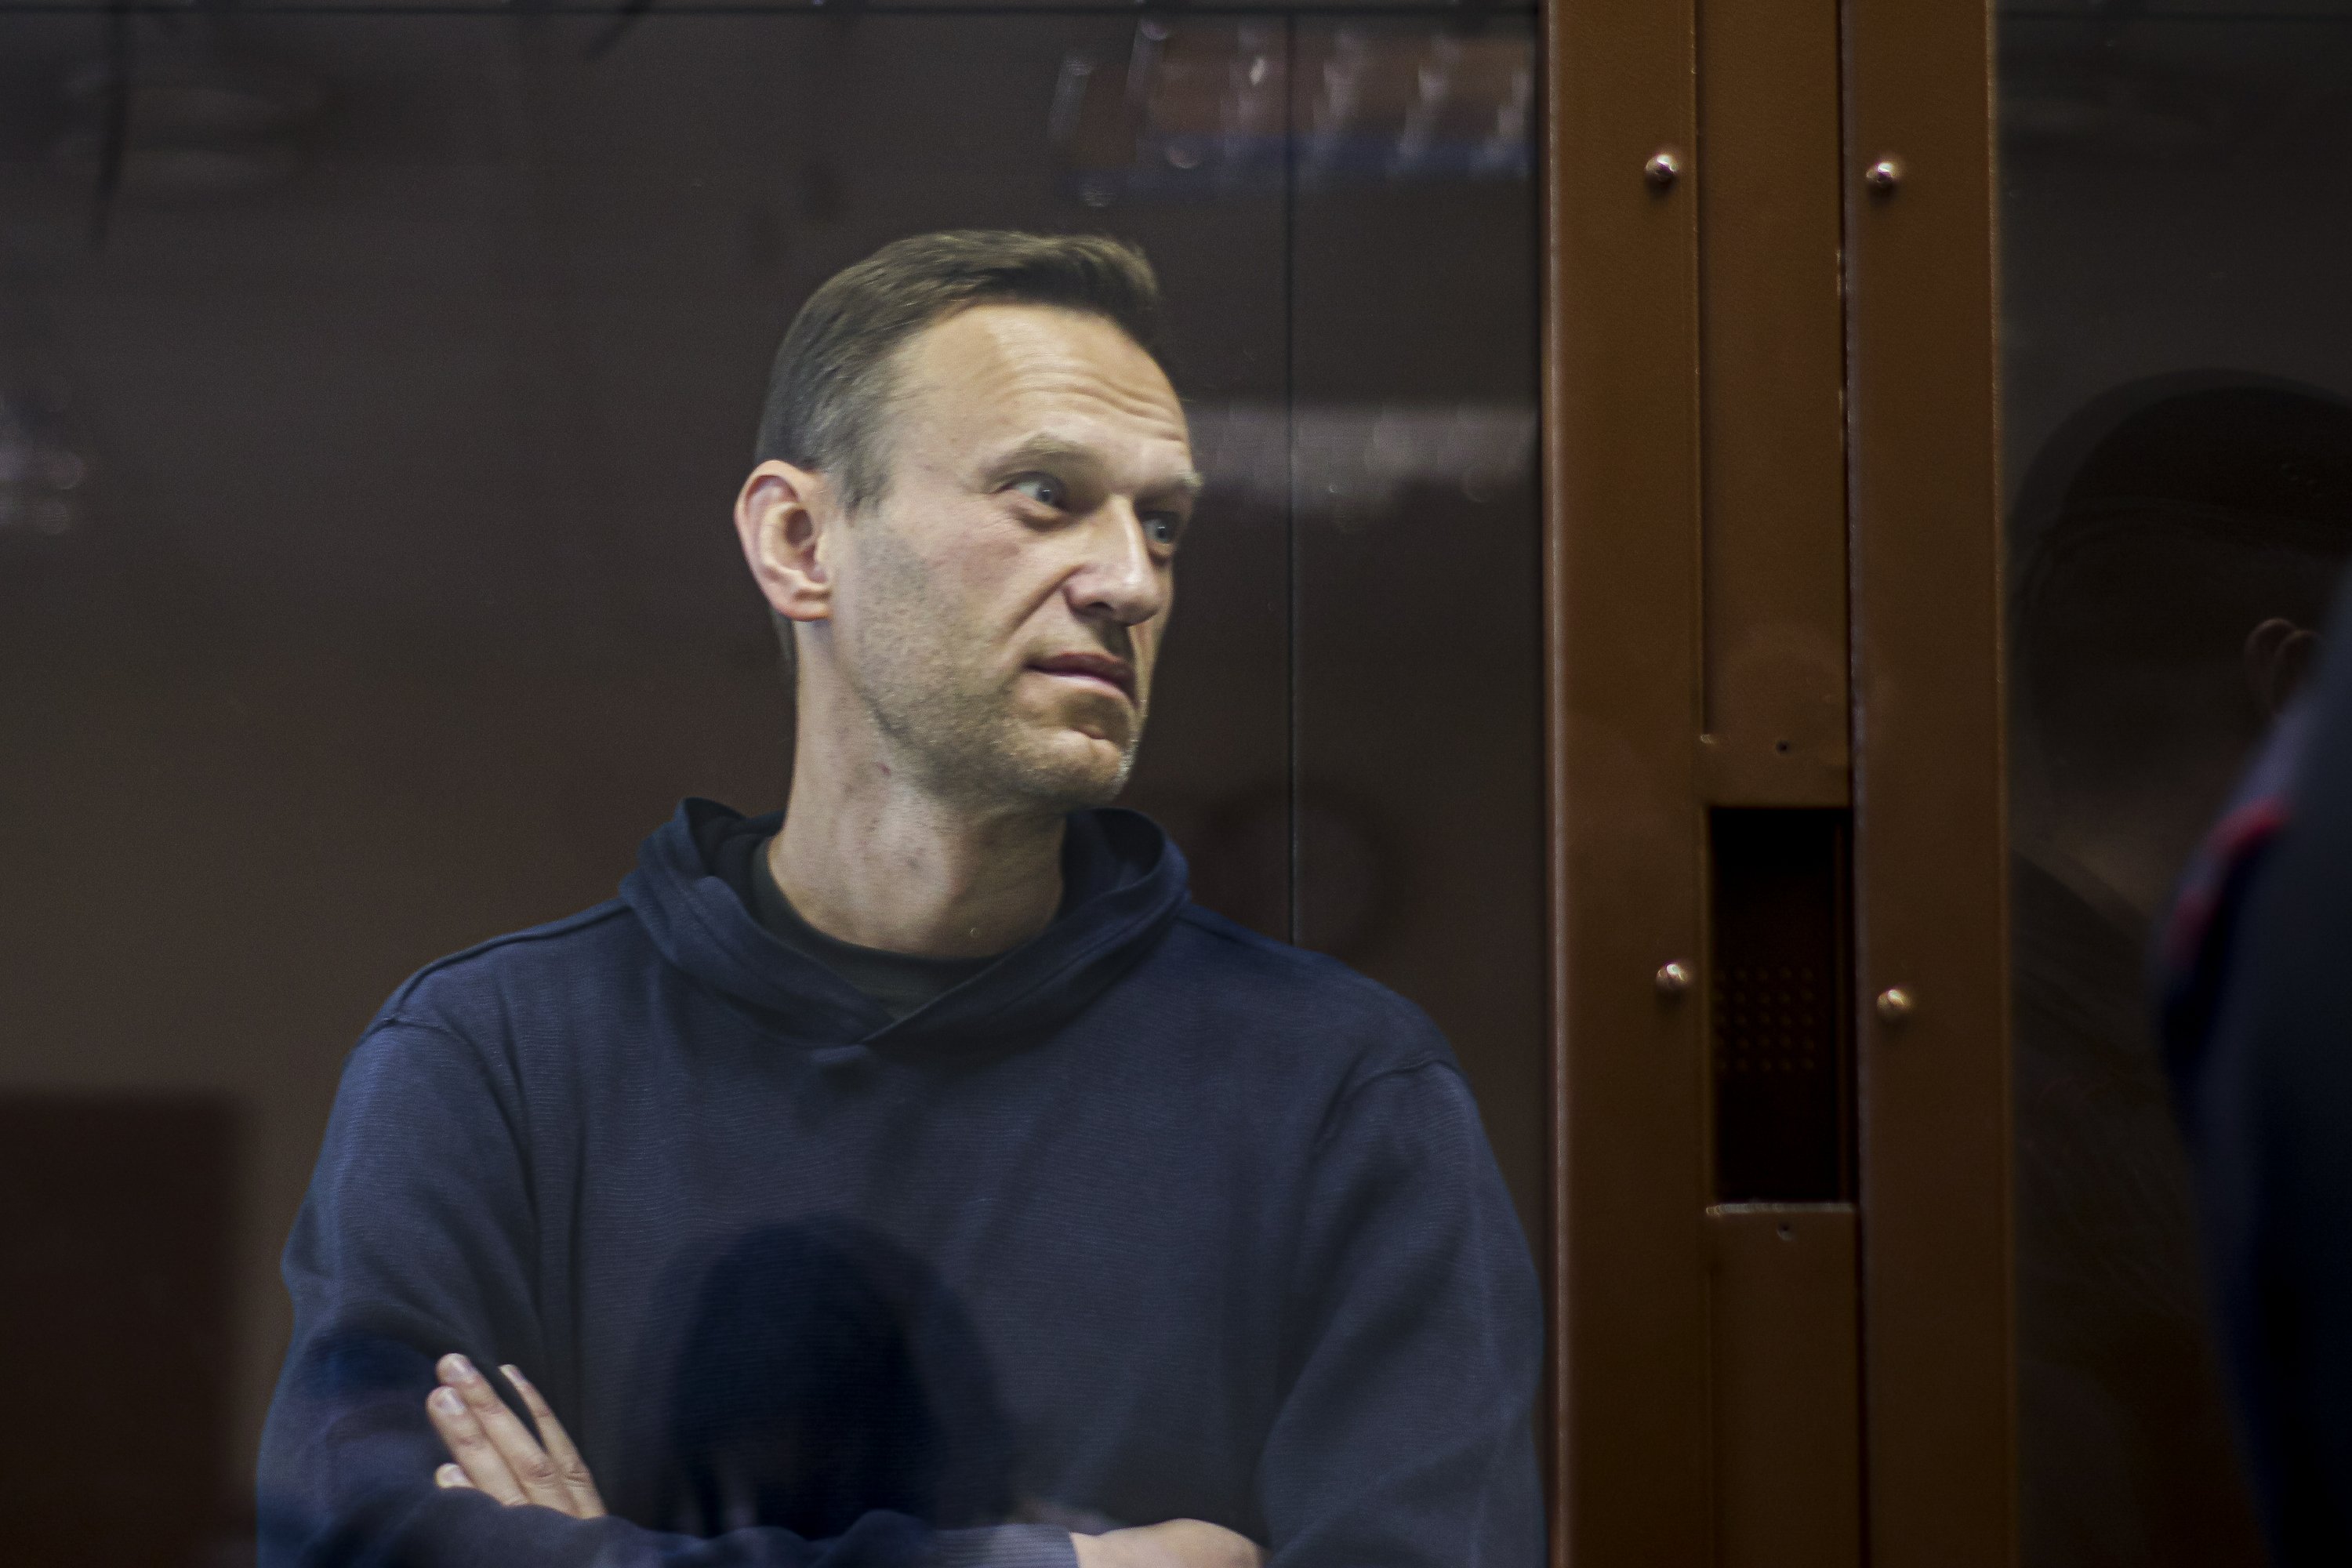 In the new tactic, Navalny’s supporters gathered in the courtyard